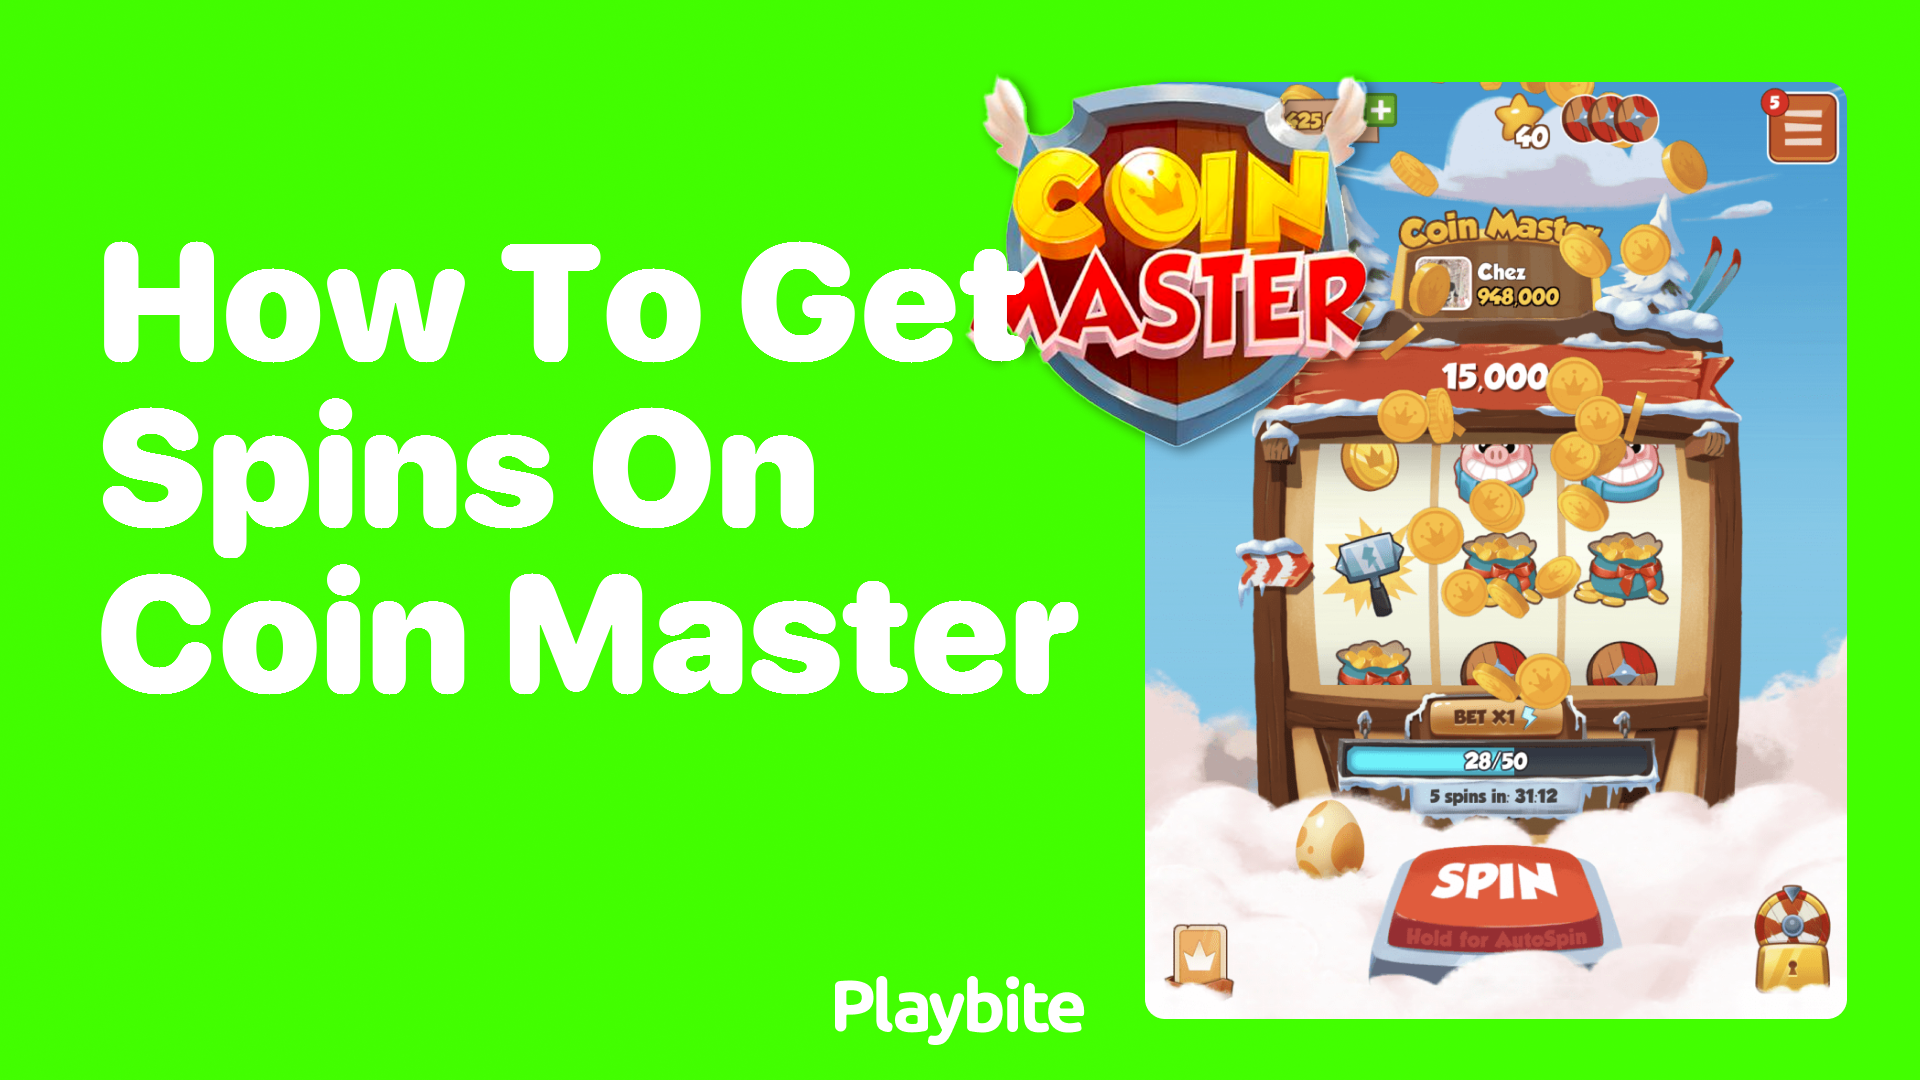 Coin master not appearing in app store